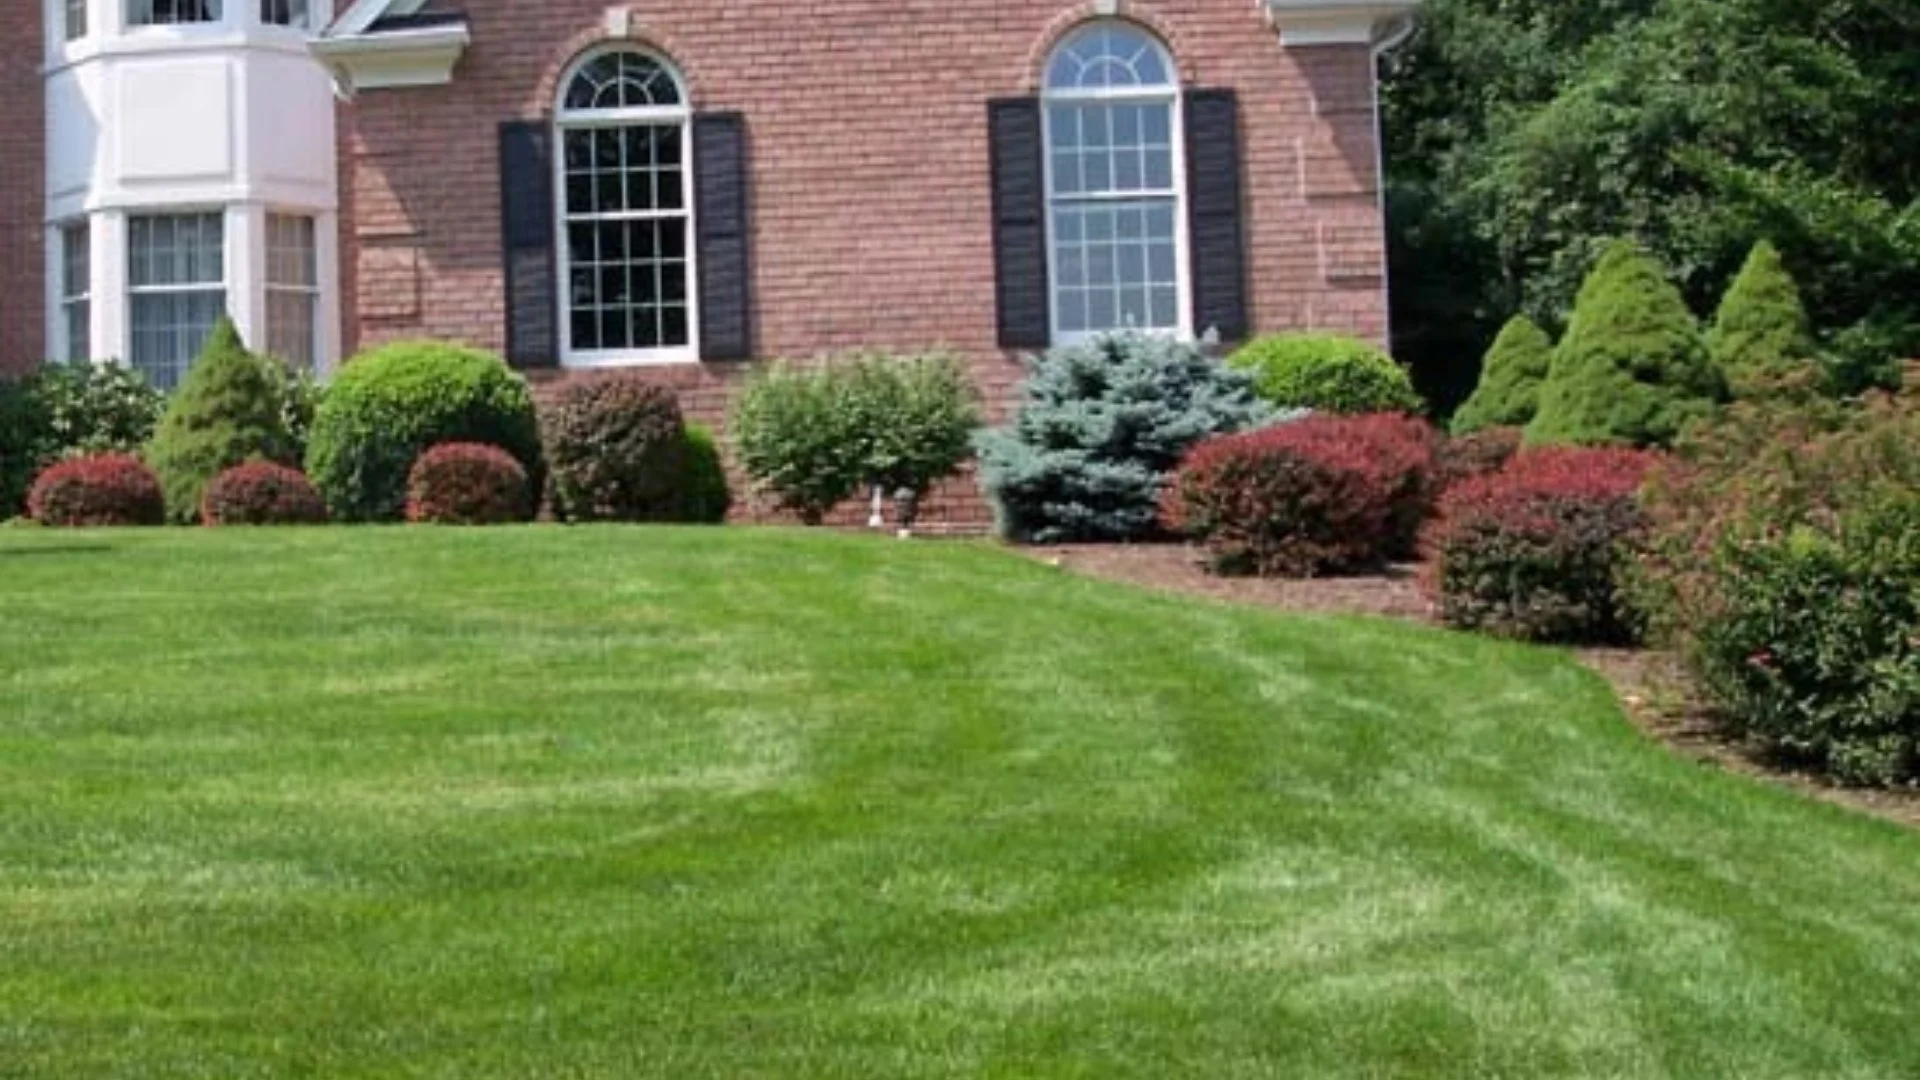 Here’s What To Do With the Cores Left on Your Lawn After Aeration